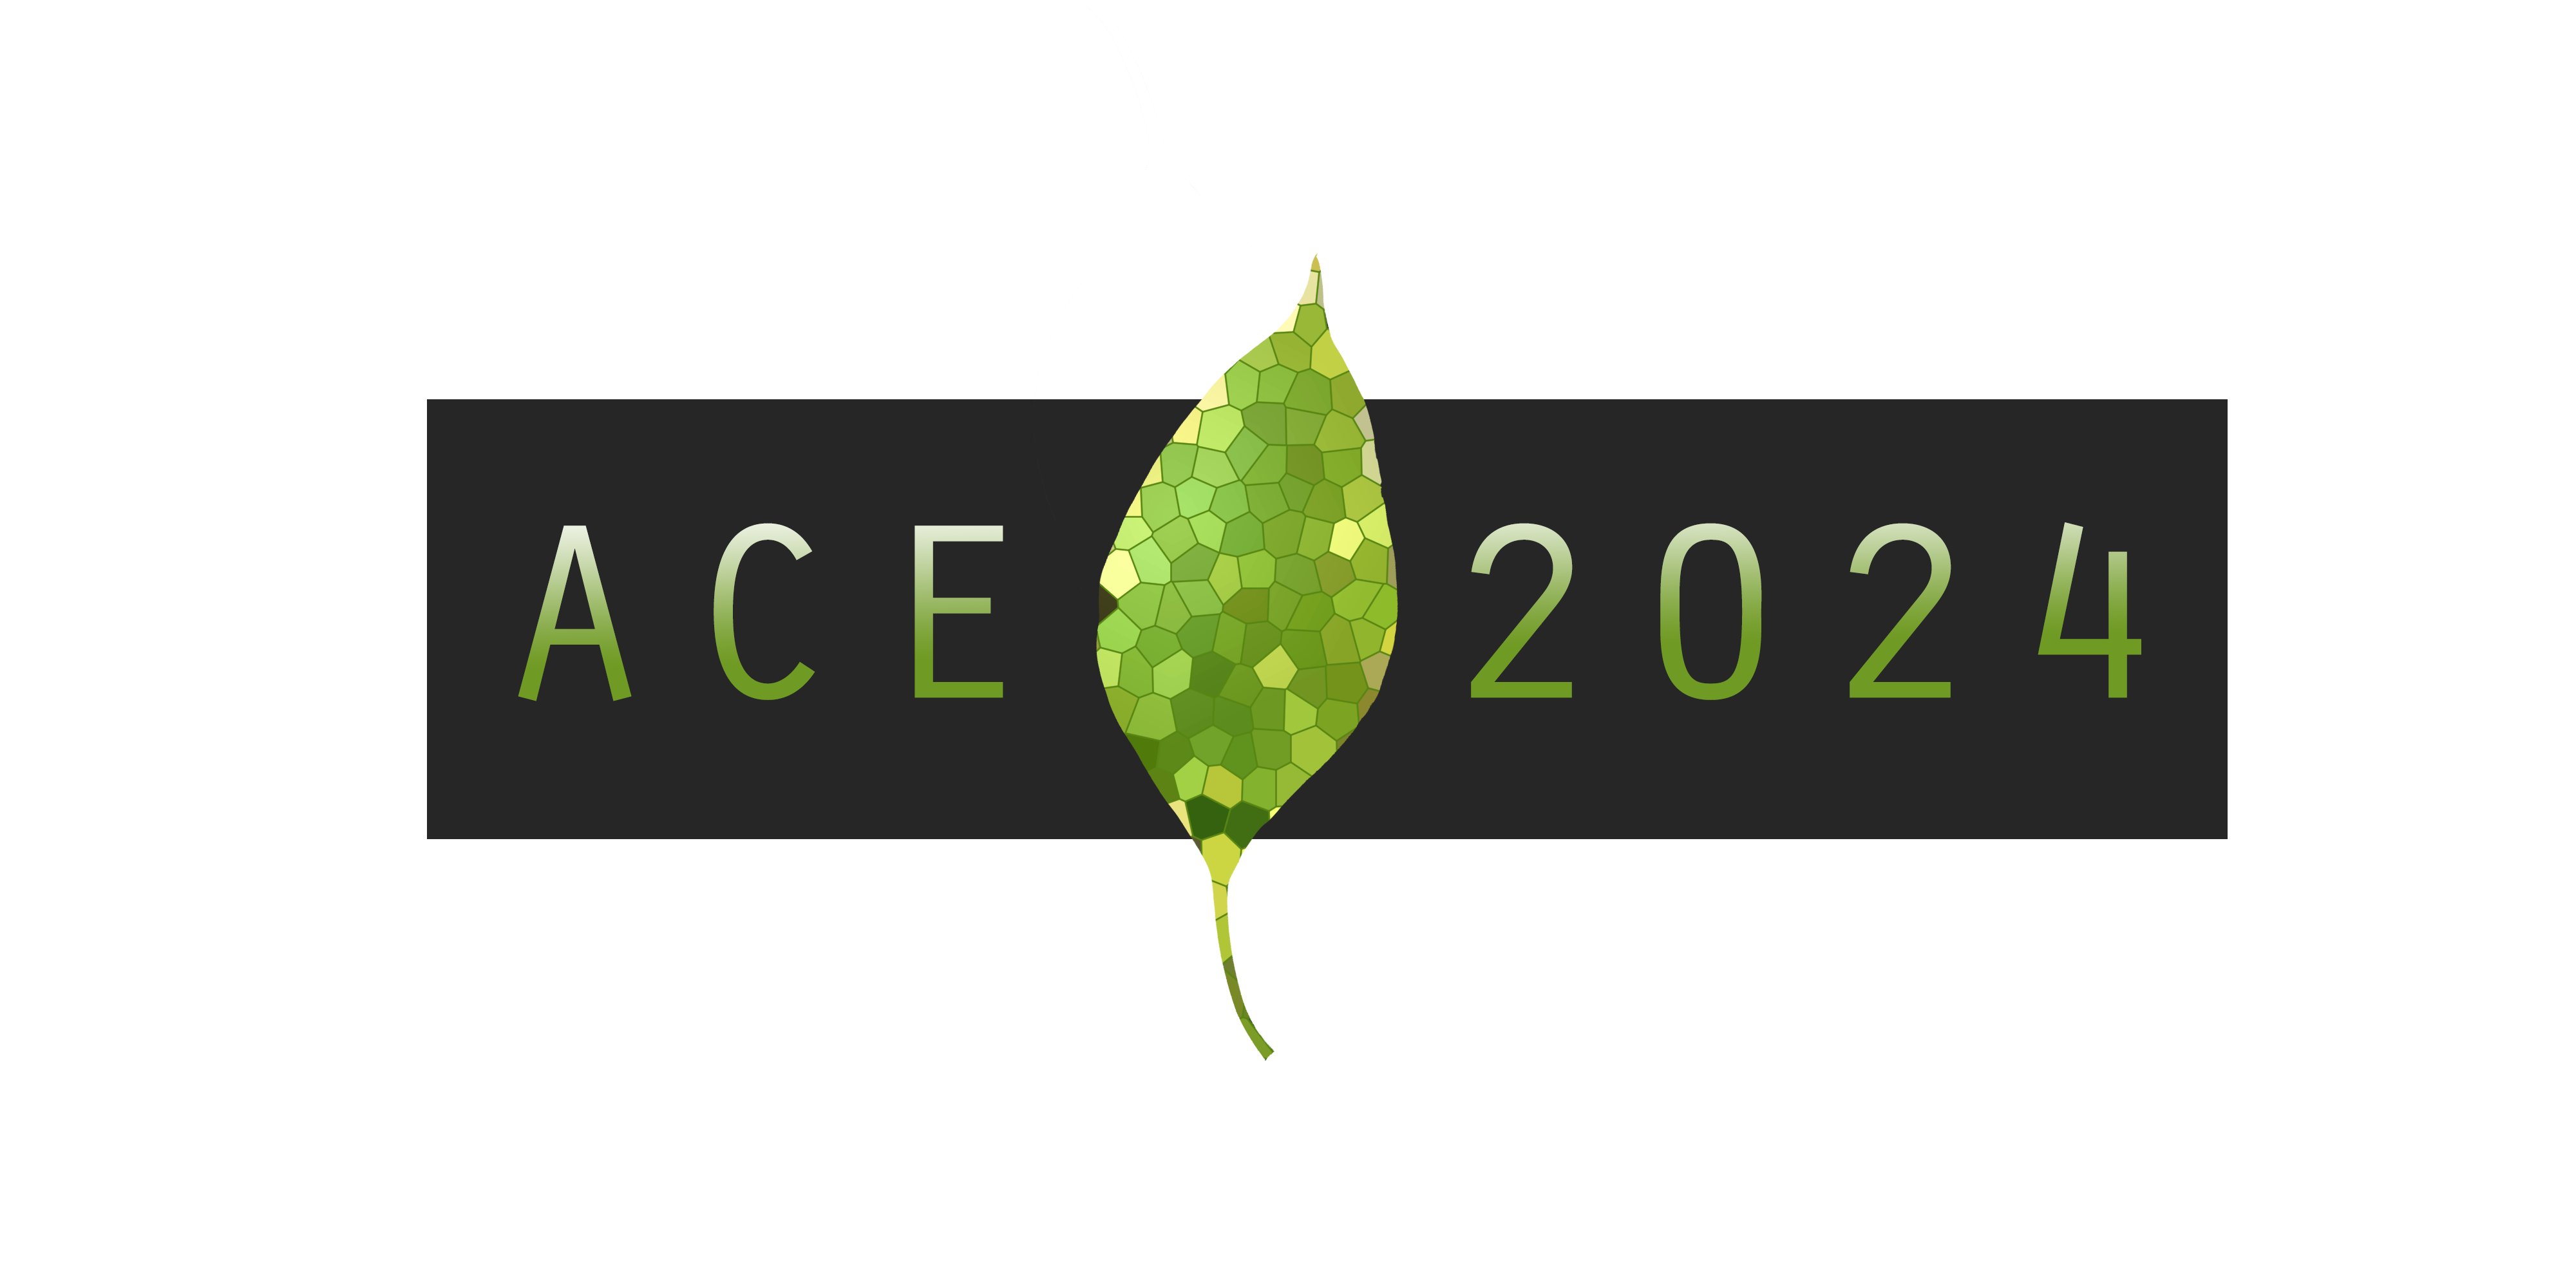 ACE 2023 with green mosaic patterned leaf